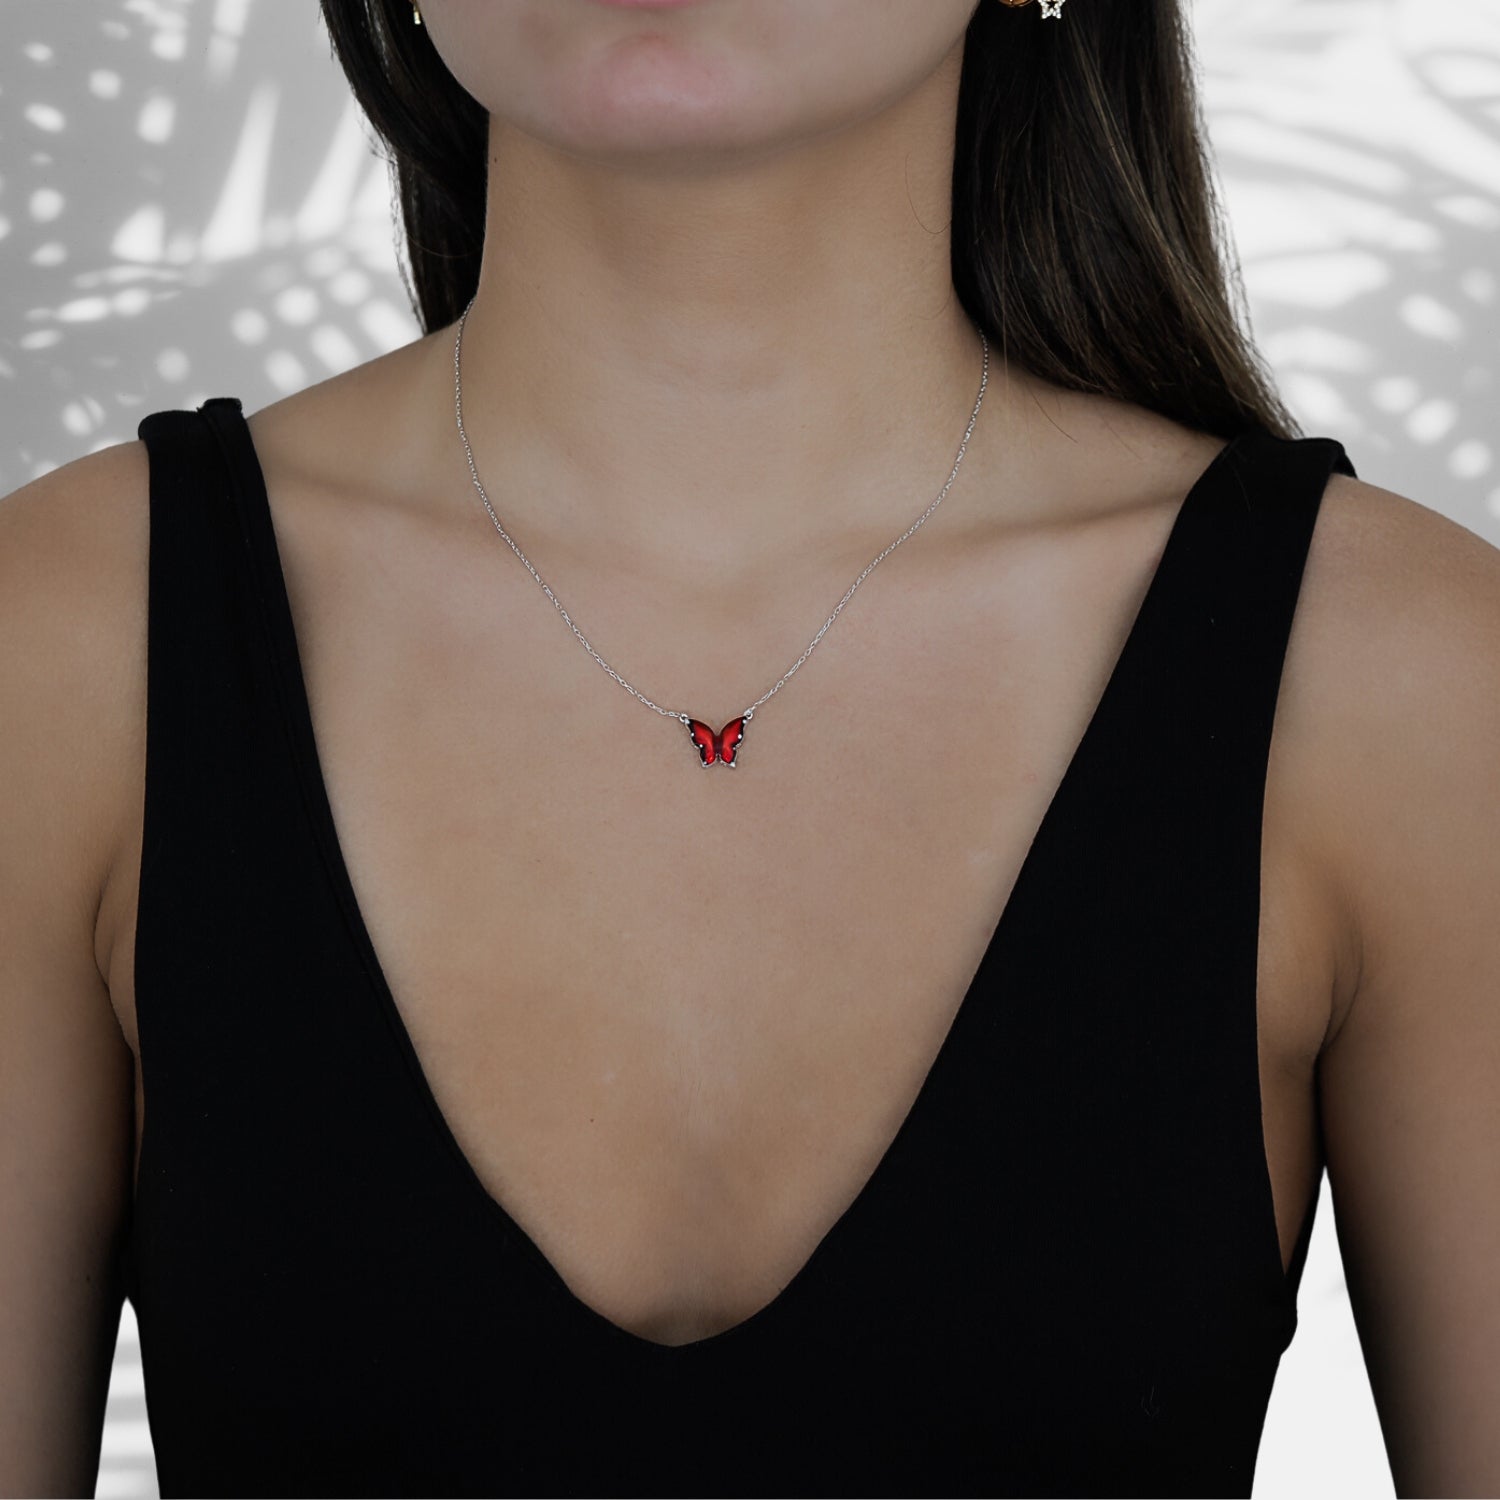 Model wearing the Silver Joy Red Enamel Butterfly Necklace, showcasing its unique design and the transformative energy it symbolizes.